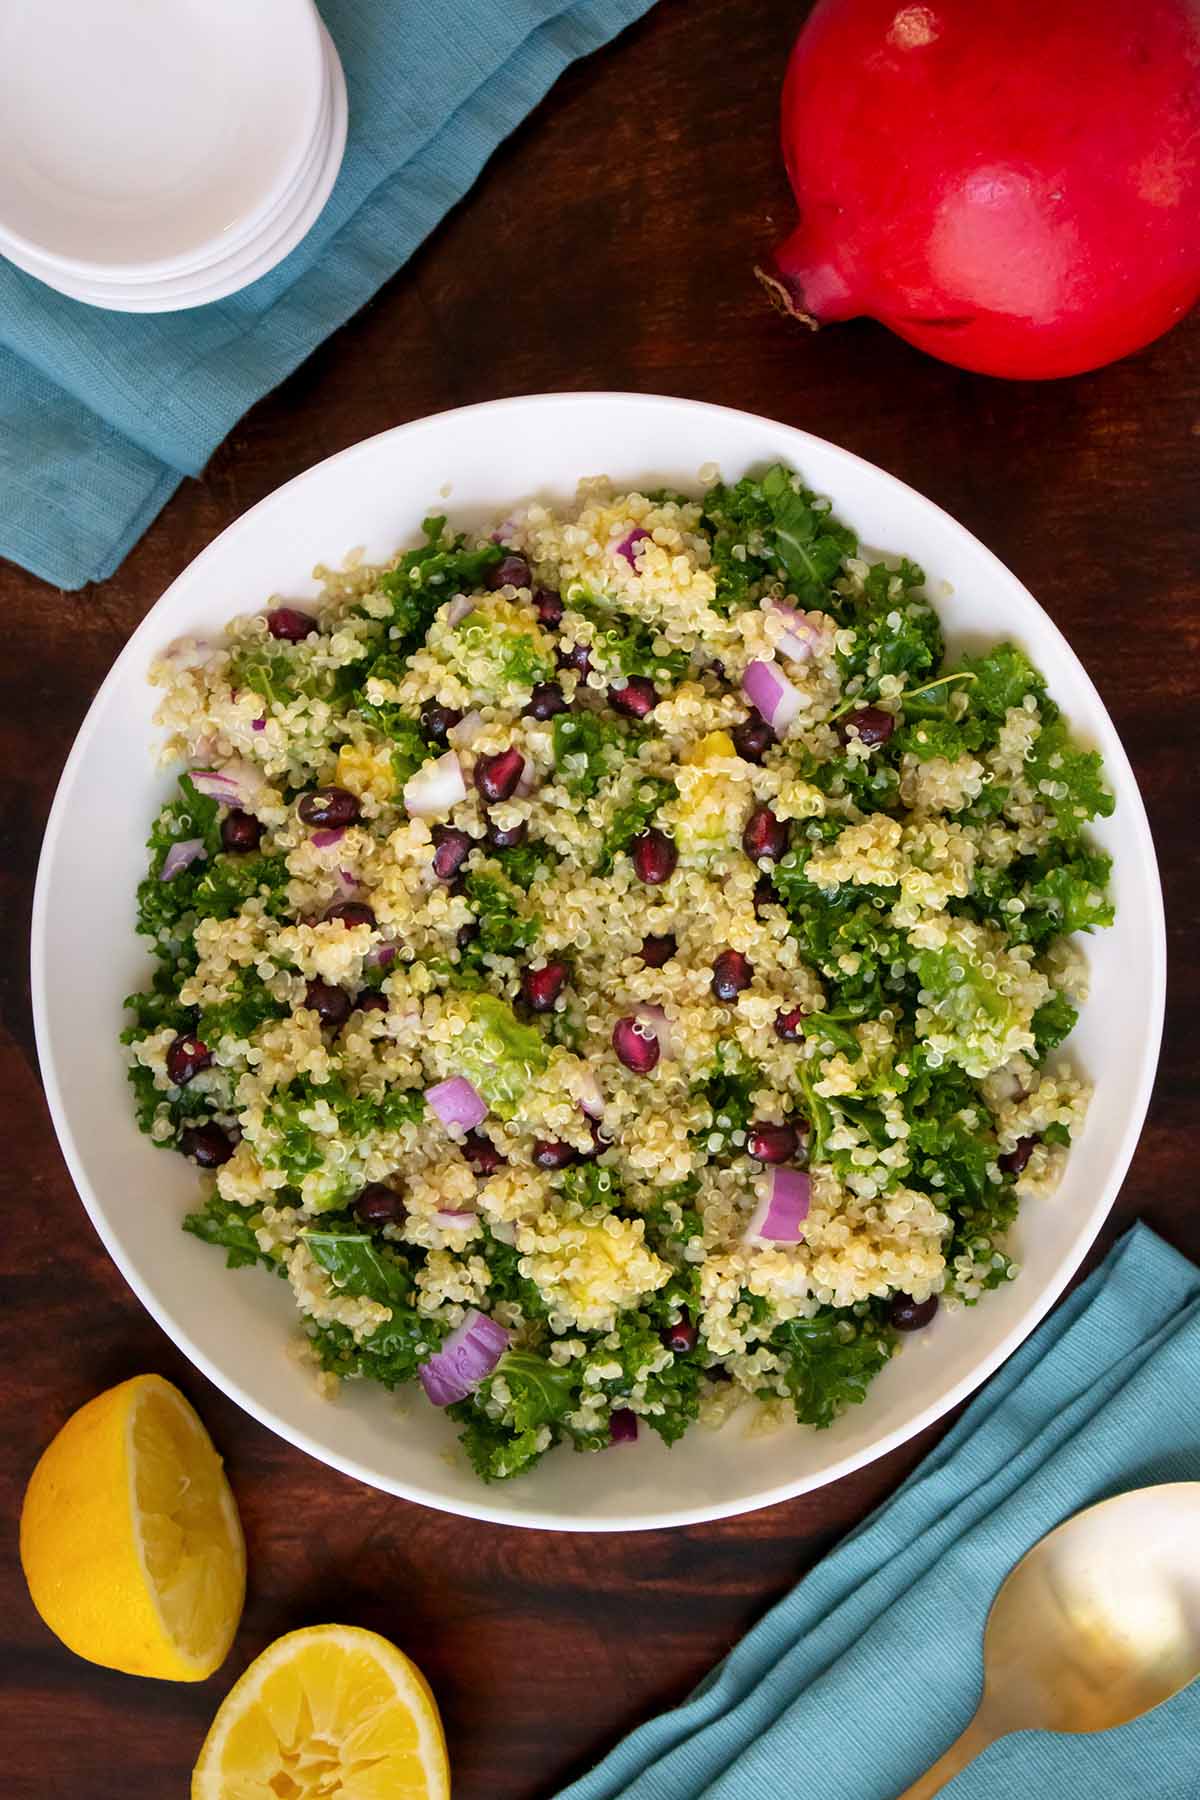 bowl of quinoa salad with kale, pomegranate seeds, avocado, and red onion on a table with fruits and napkins